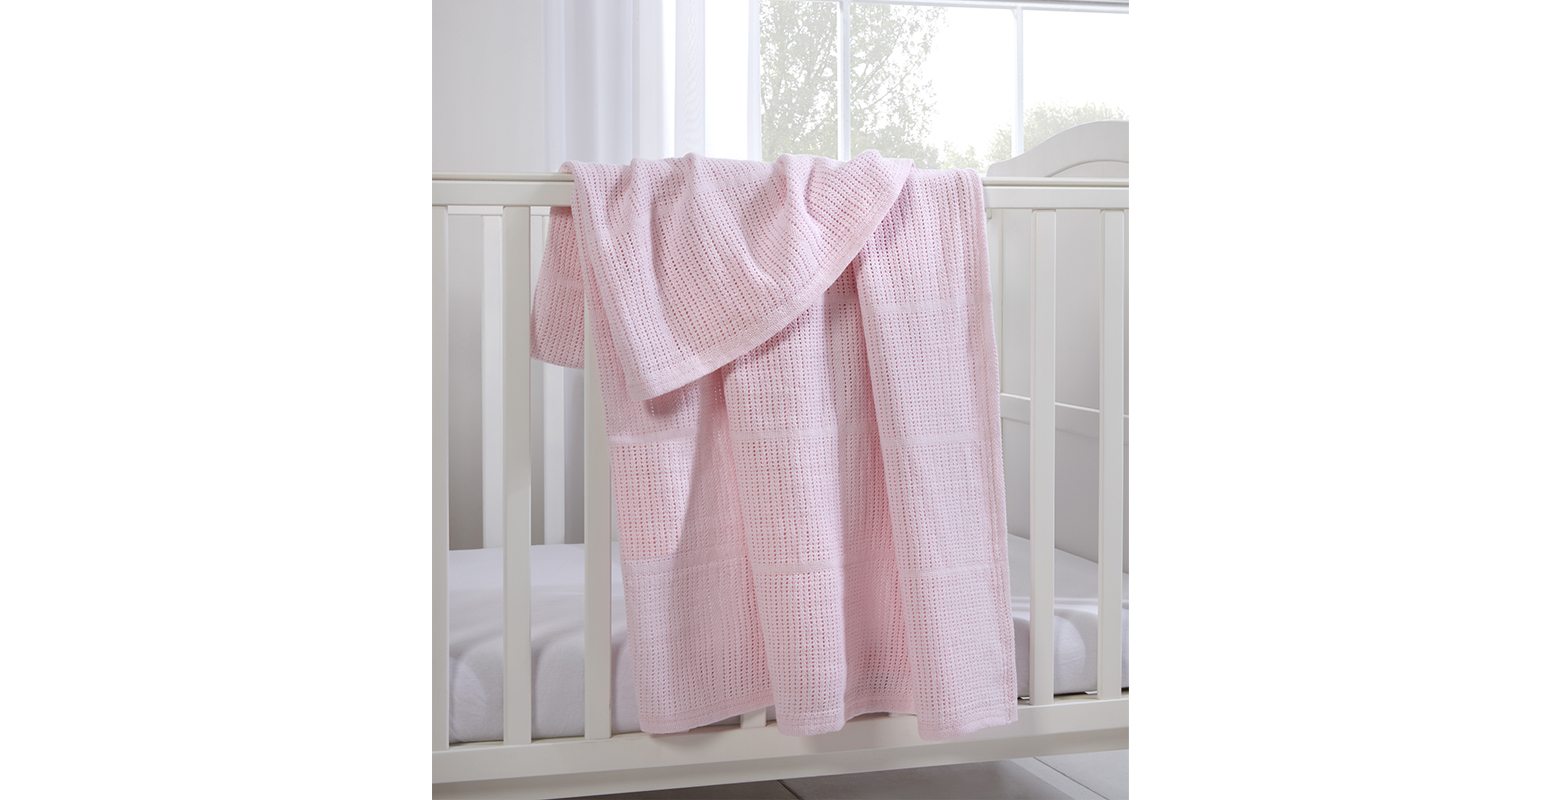 Clair De Lune Cell Blanket Pink Large